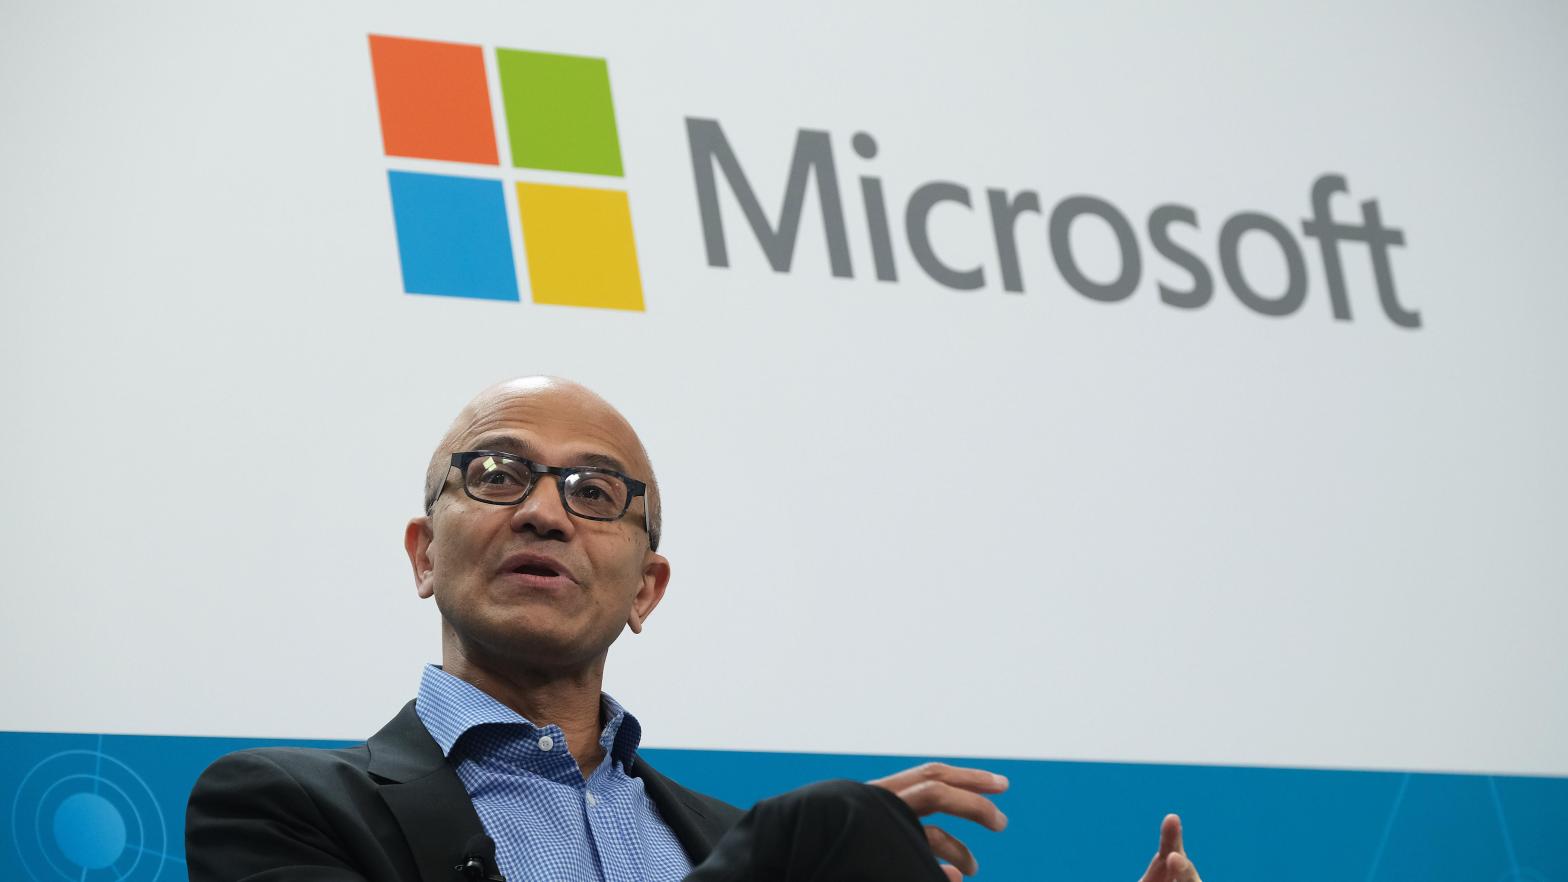 Microsoft CEO Satya Nadella has been incredibly bullish on AI, and now the company is pulling on its multi-billion dollar partnership with OpenAI even harder. (Photo: Sean Gallup, Getty Images)